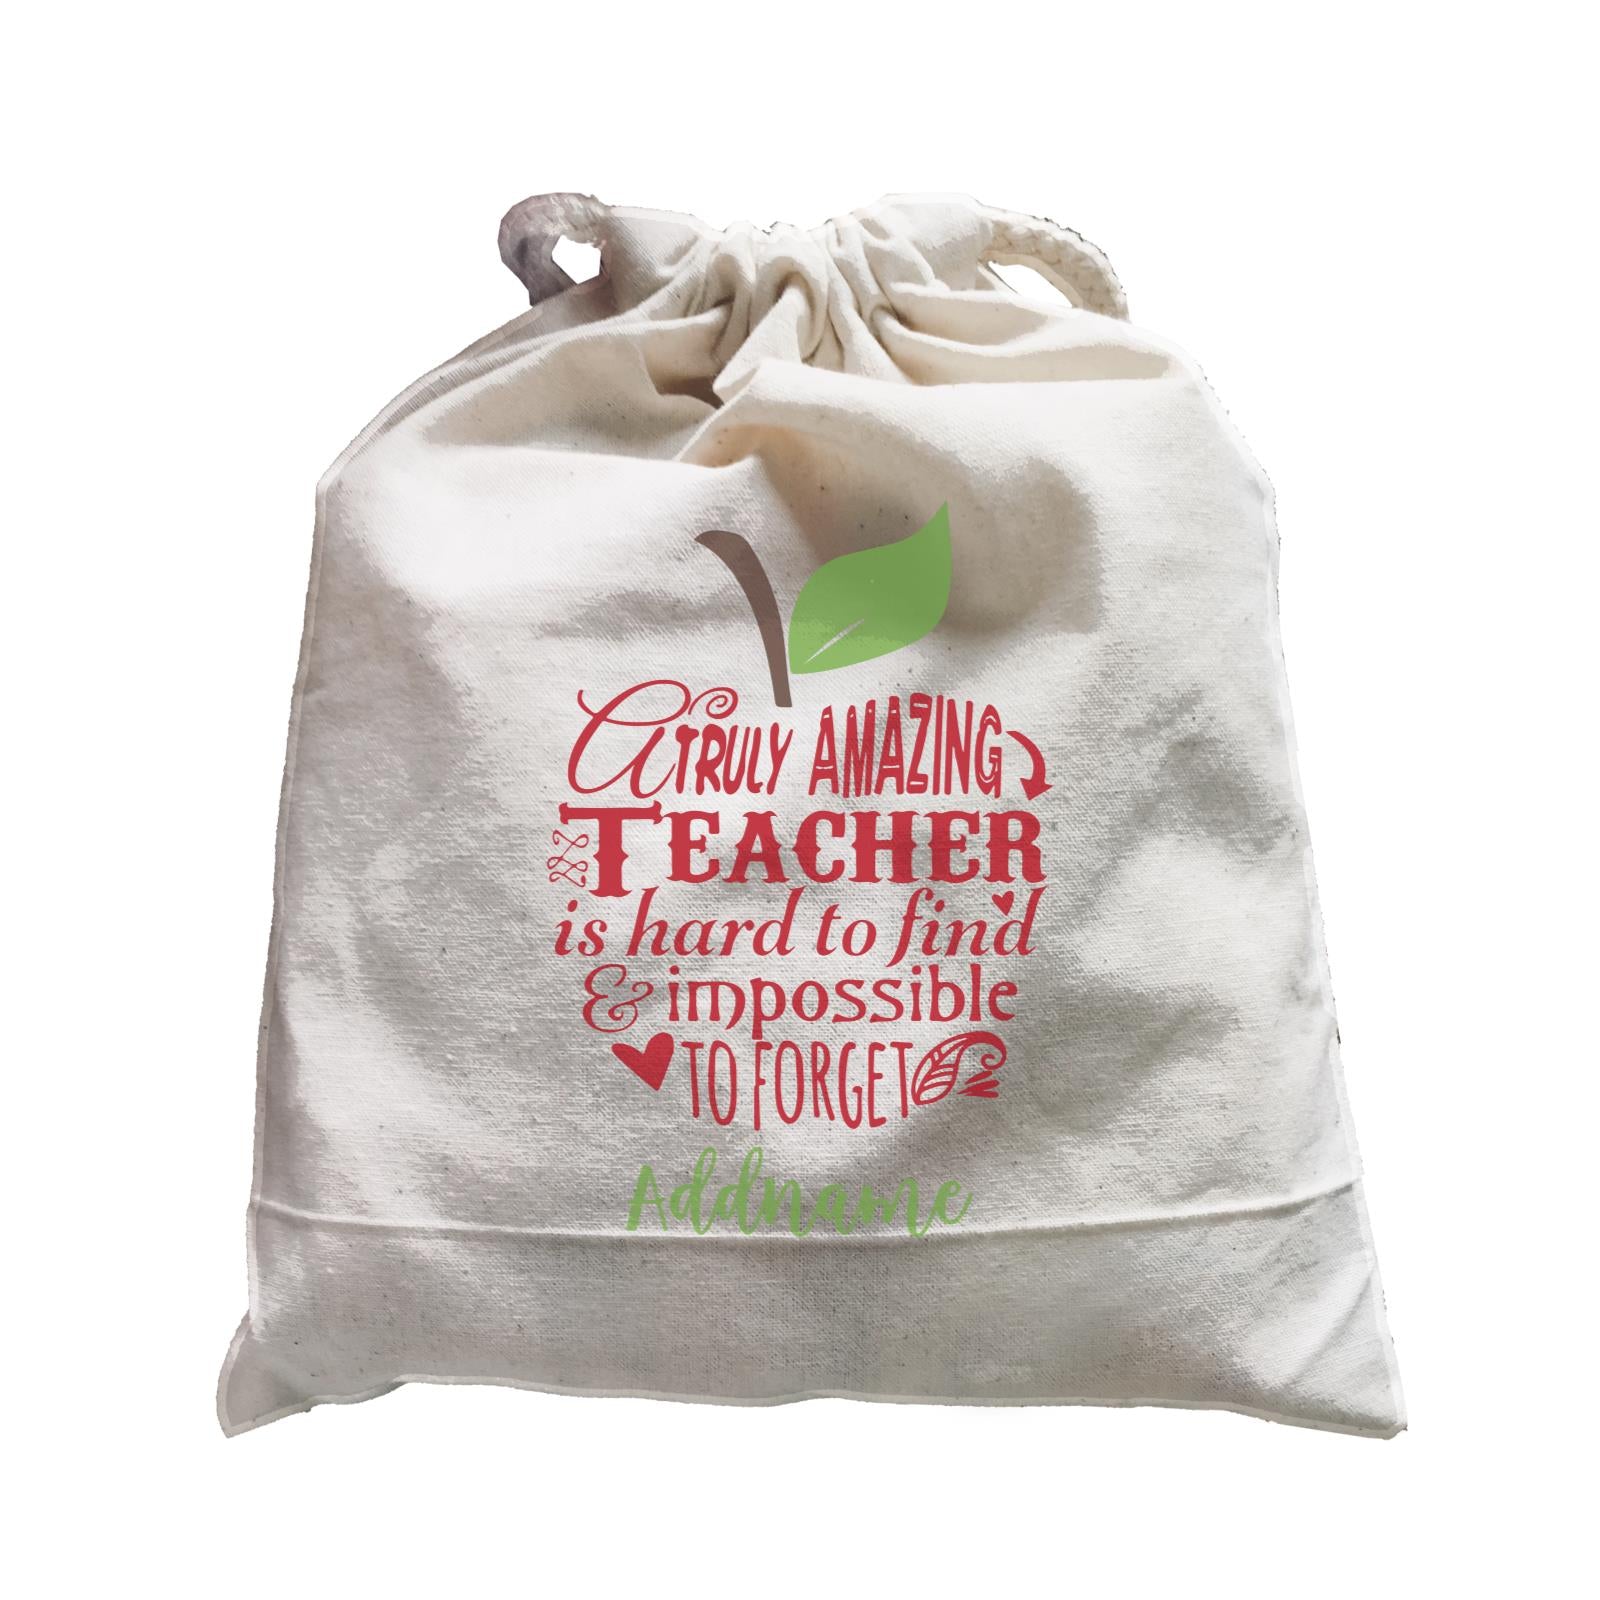 Teacher Apple Truly Amazing Teacher is Had To Find & Impossible To Forget Addname Satchel